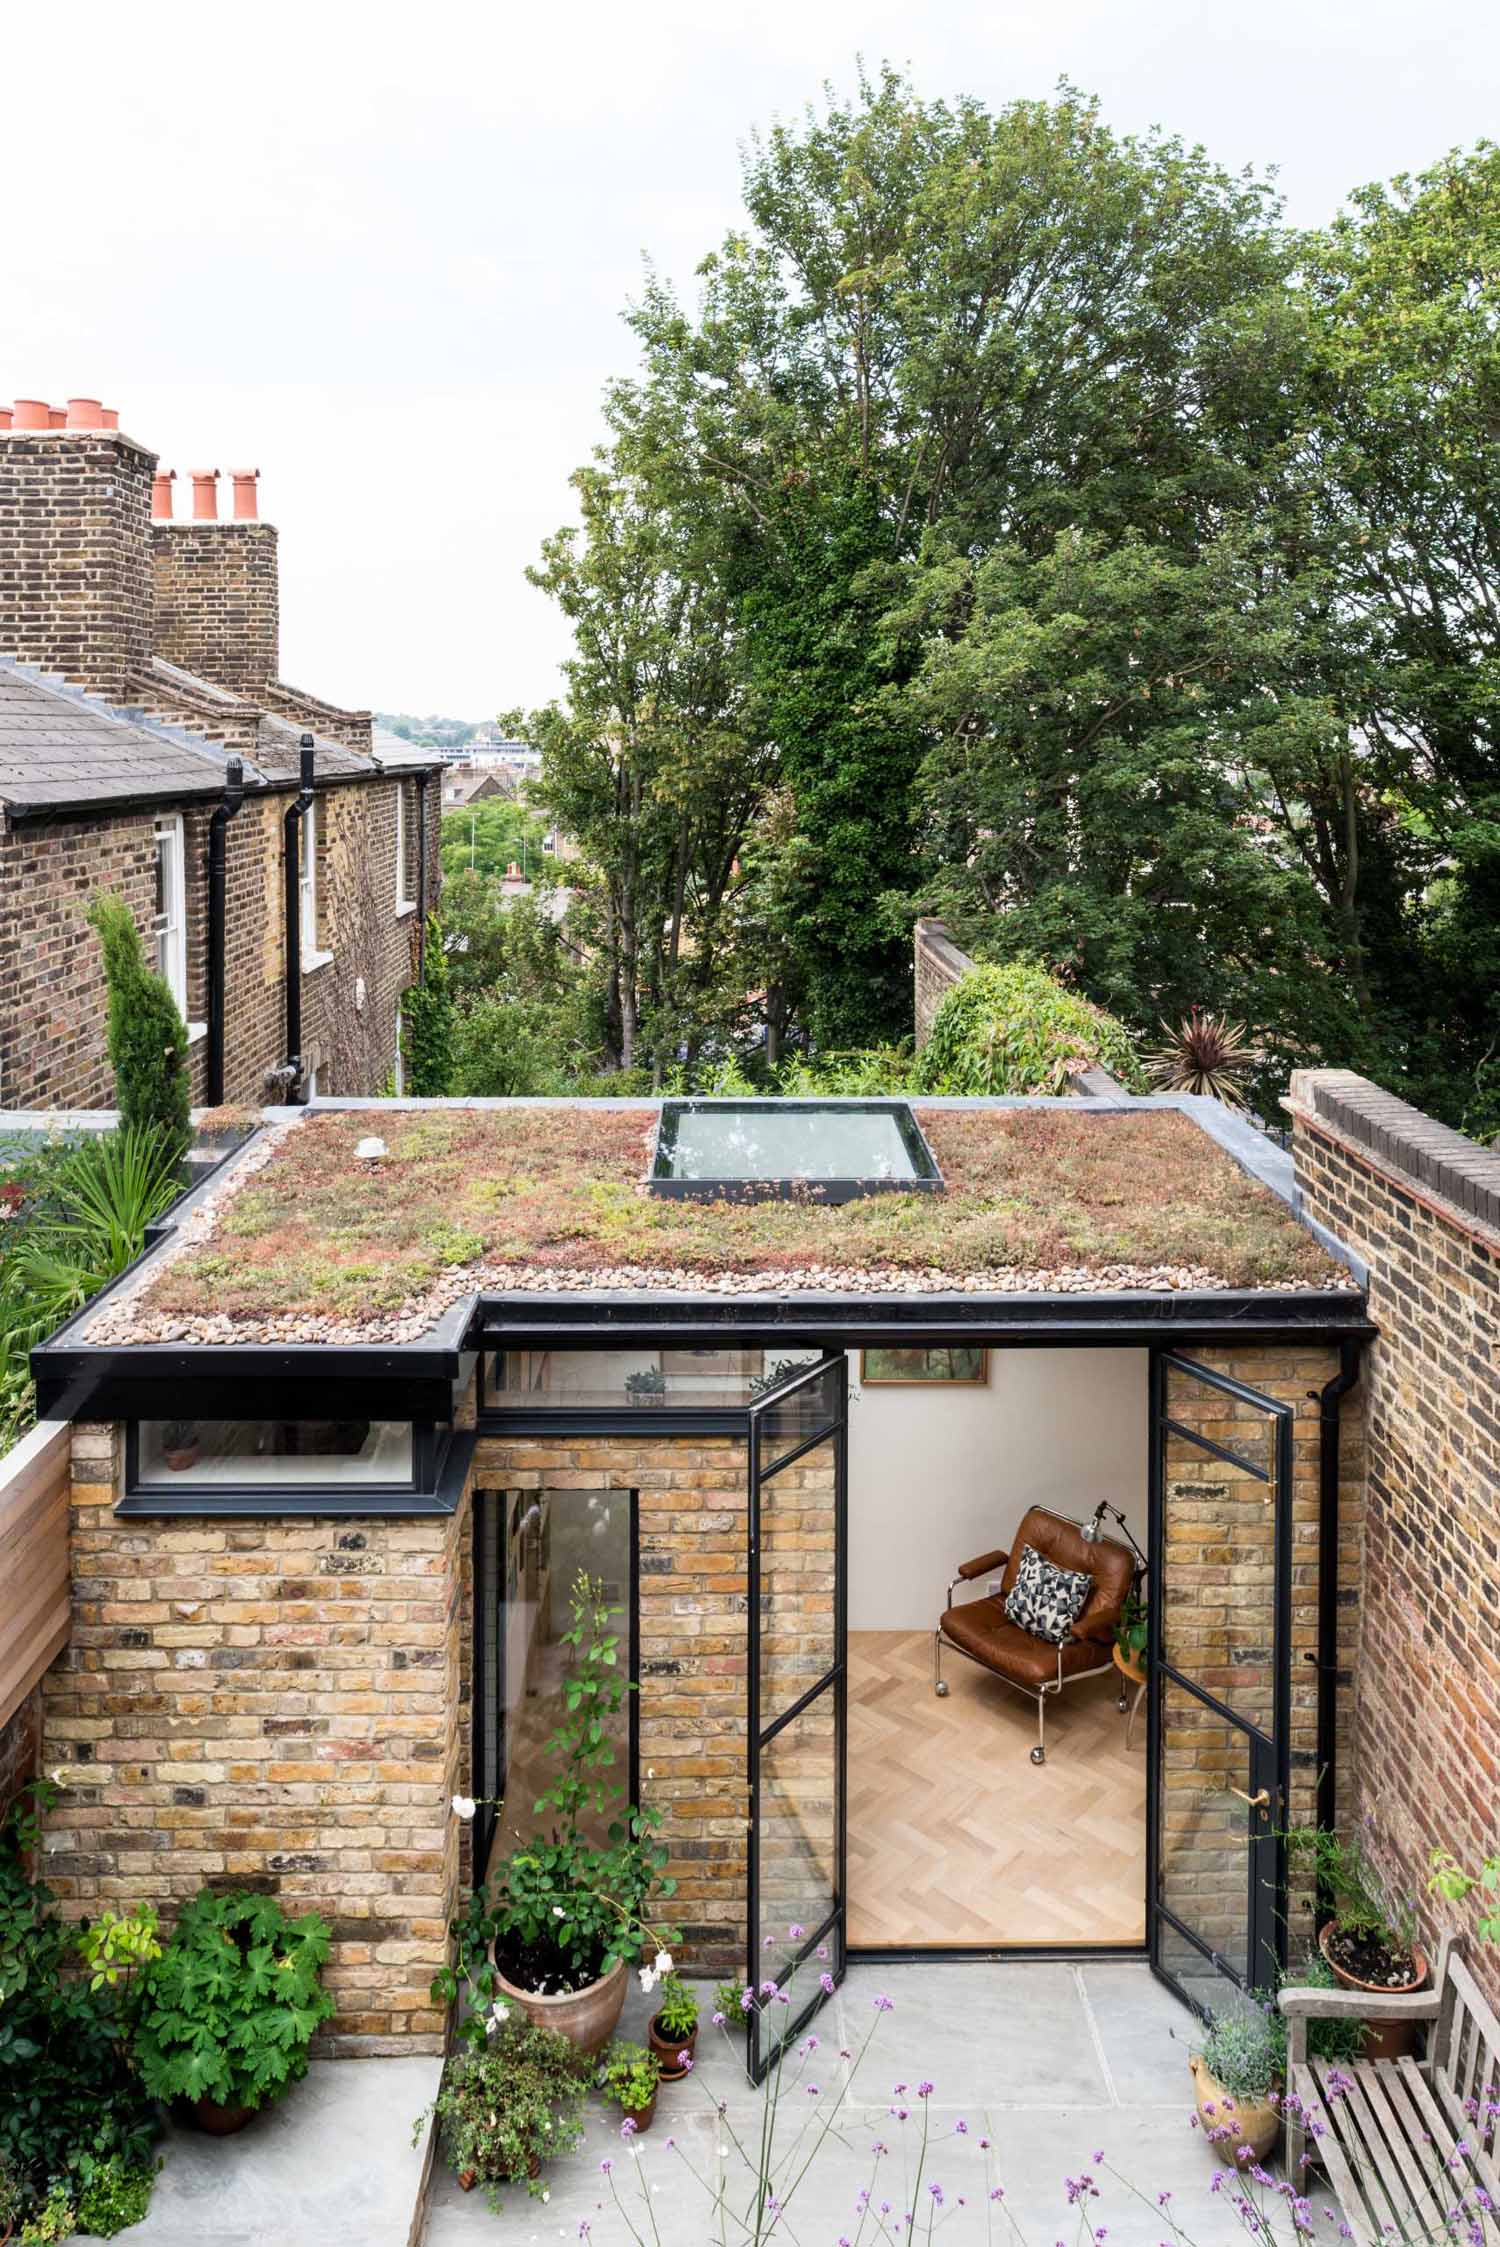 A new garden studio for a writer that includes a green roof, sitting area, built-in shelving, and a bathroom.